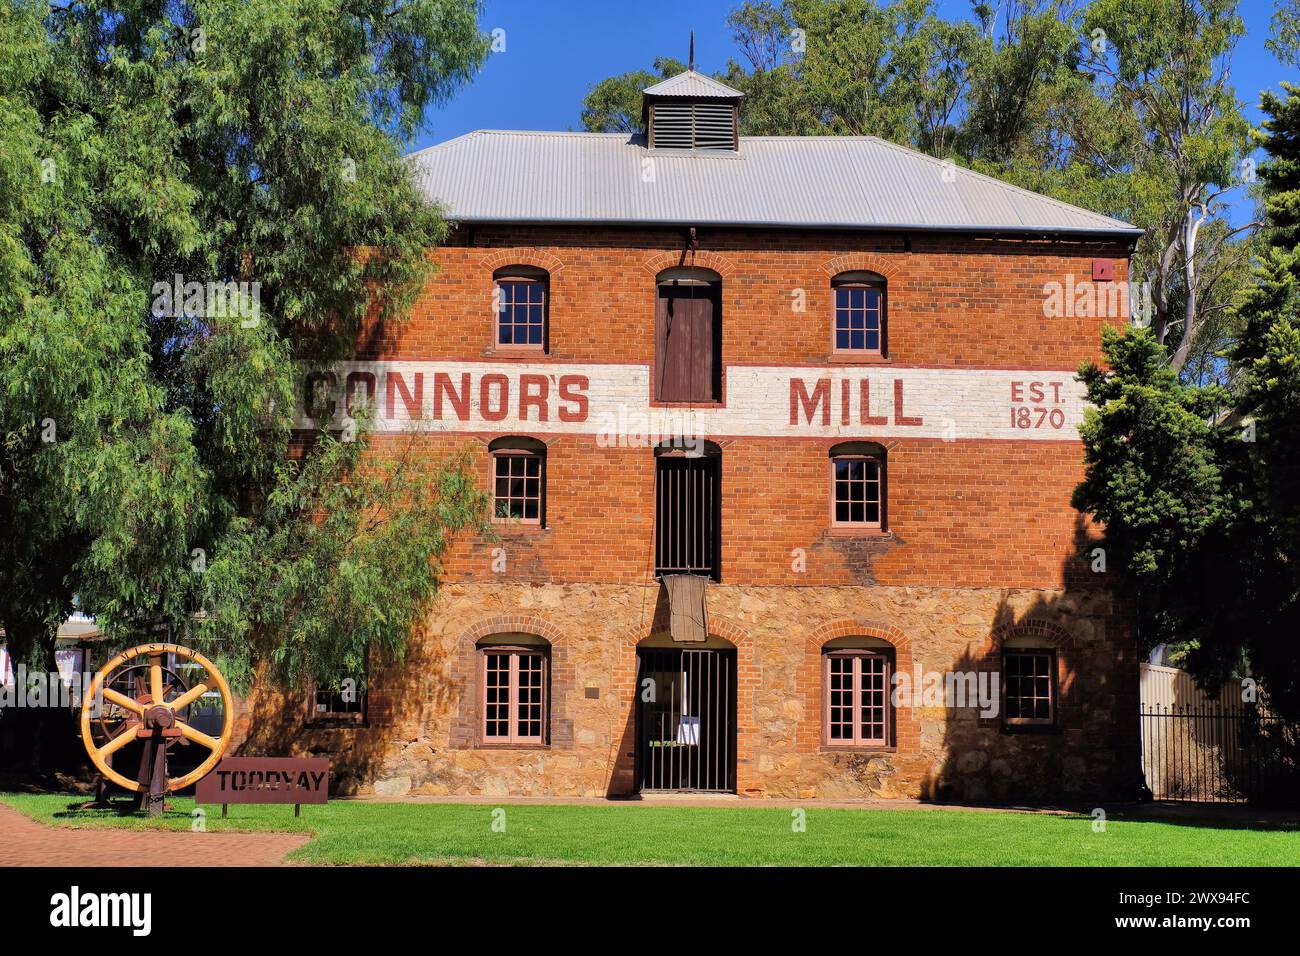 Toodyay: Connor’s Mill flour mill museum in Toodyay, Wheatbelt, Western Australia Stock Photo